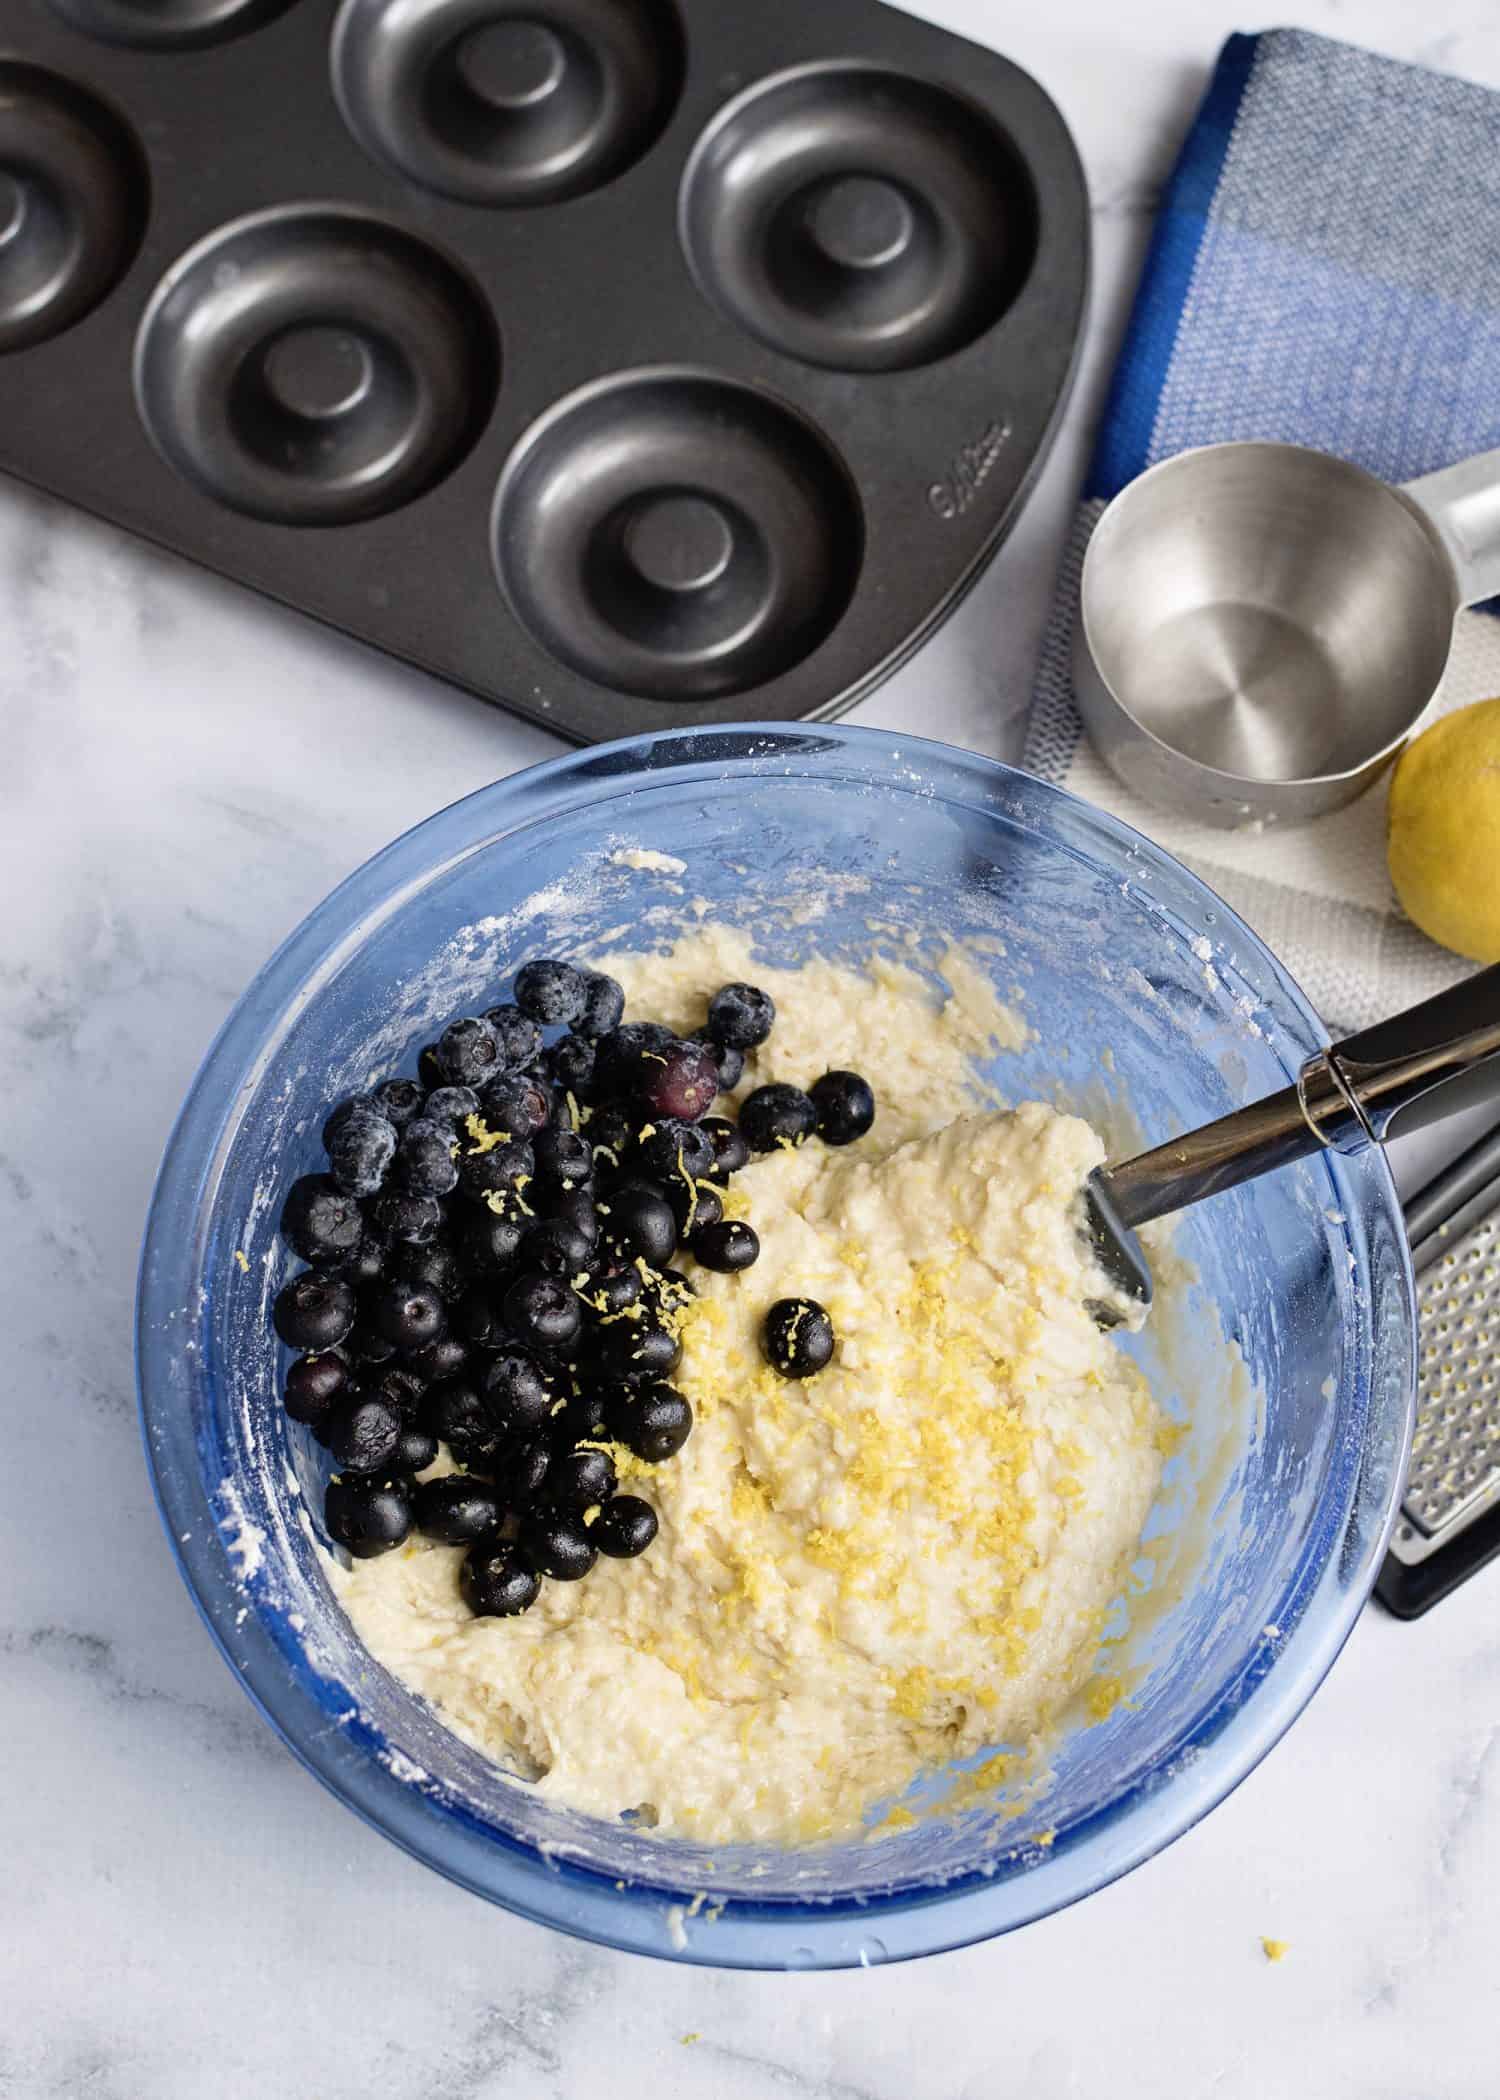 donut baking pan, blue mixing bowl with blueberries being mixed into batter